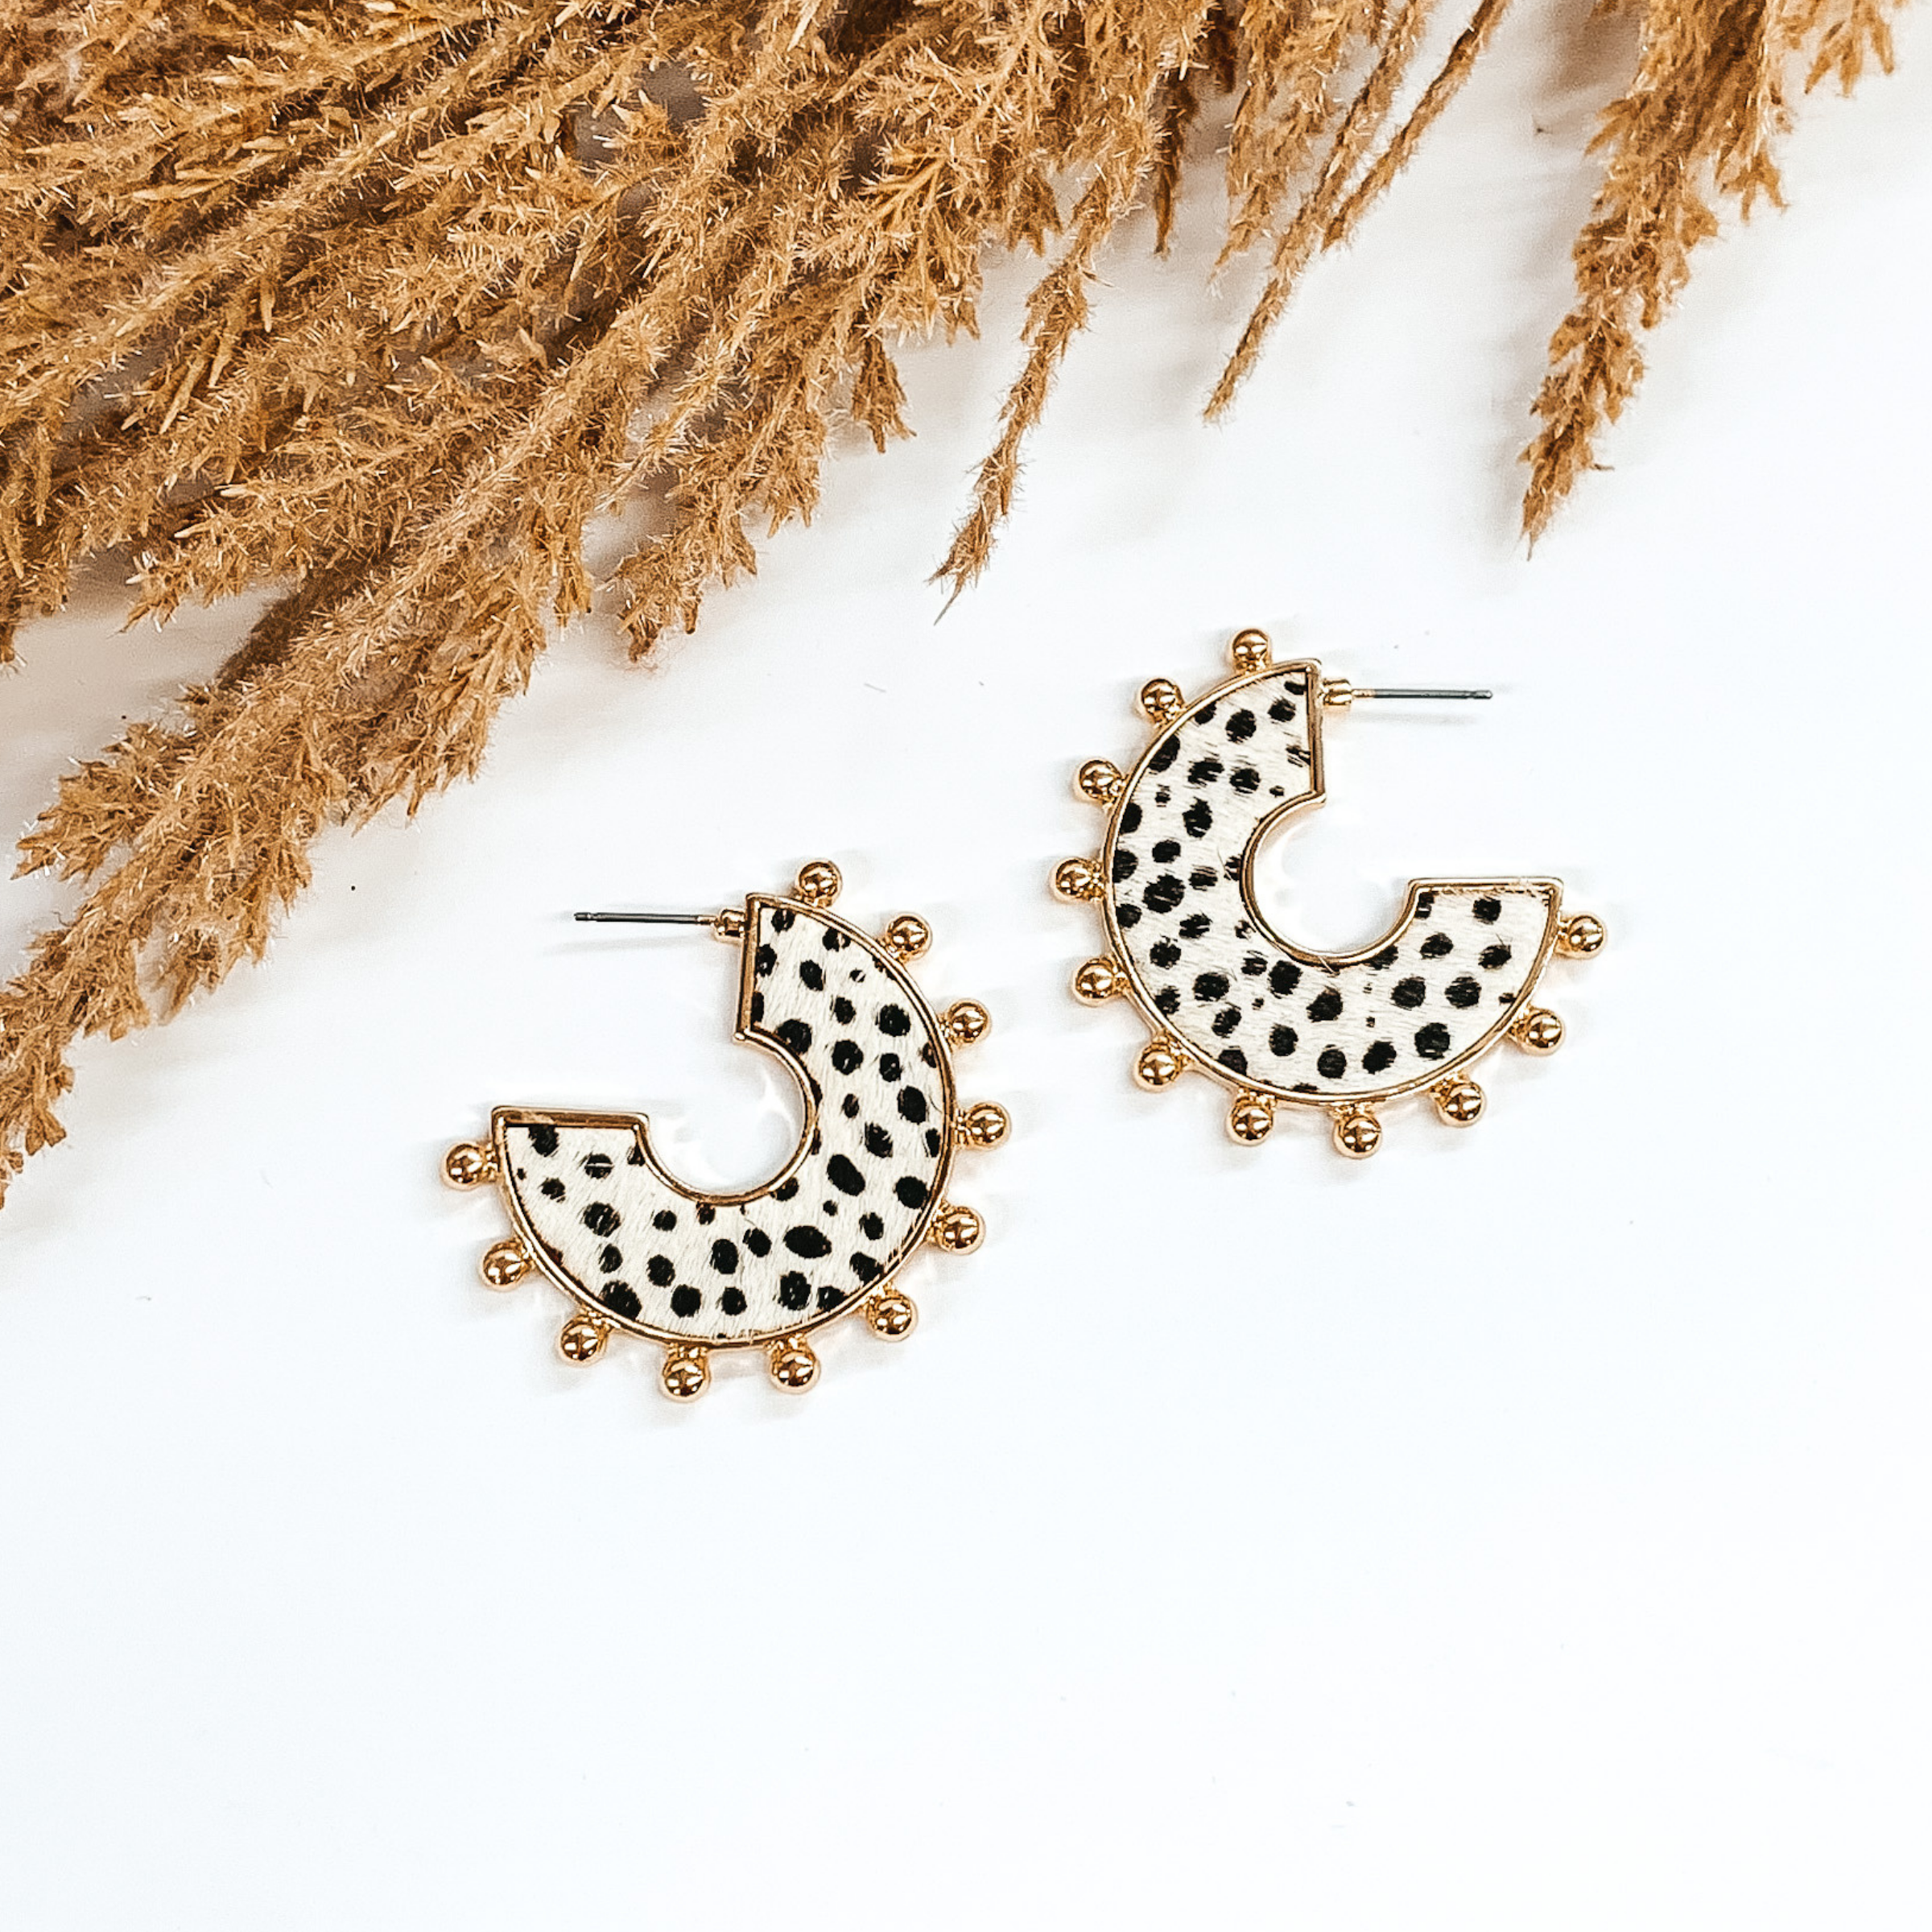 Flat hoops with white animal hide inlay with black dotted pattern. These hoops have gold beads on the edge of the earrings. These earrings are pictured o  white background with tan floral at the top of the page. 